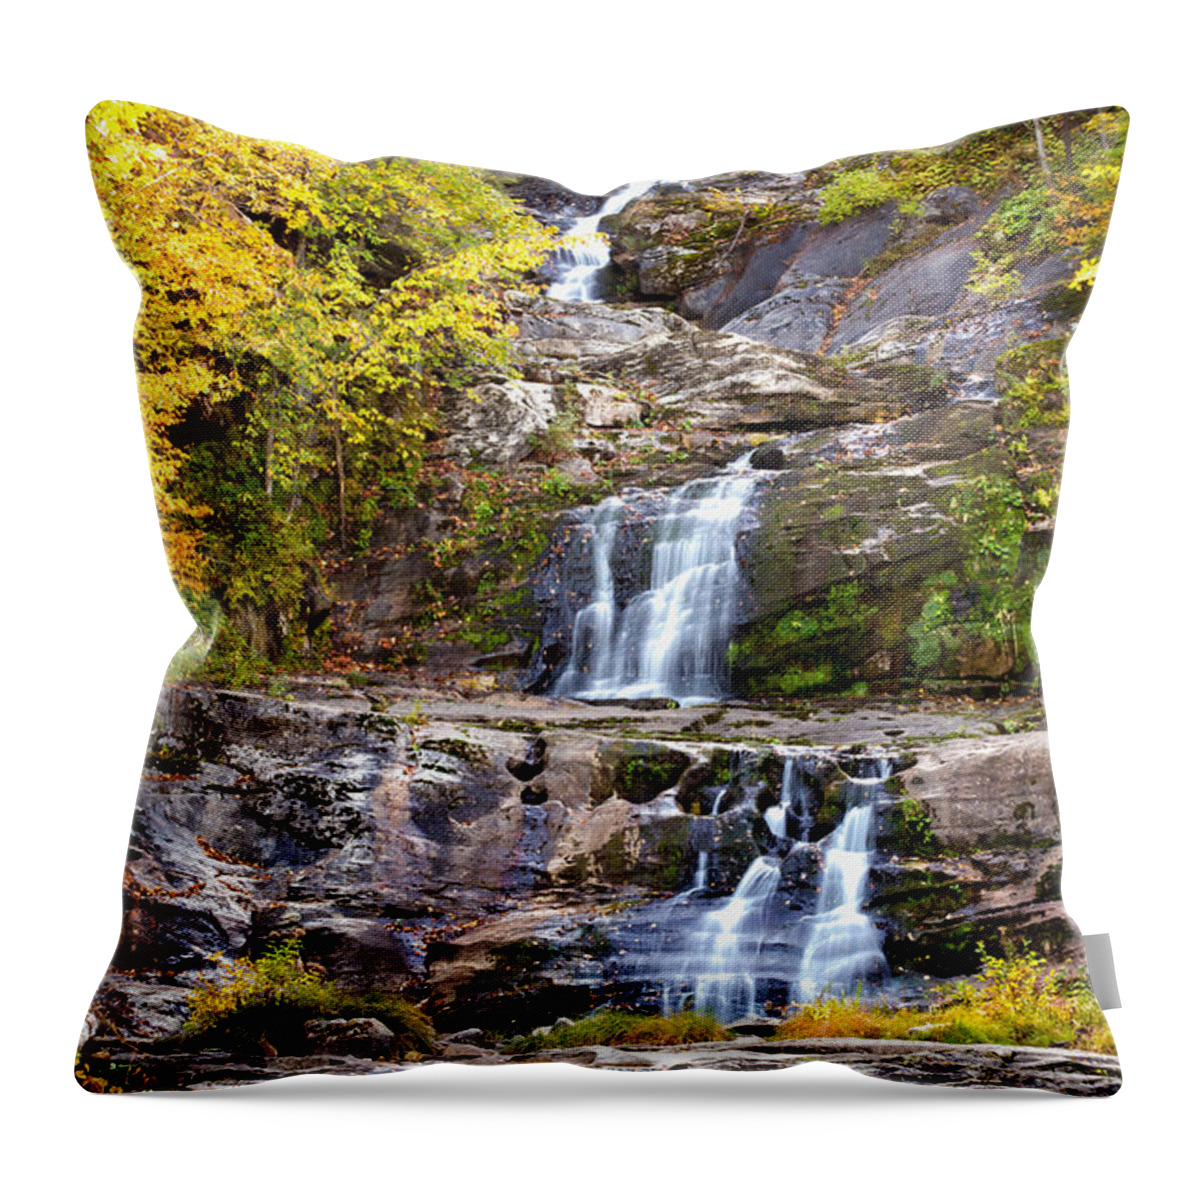 Waterfall Throw Pillow featuring the photograph Autumn Waterfall by Brian Caldwell